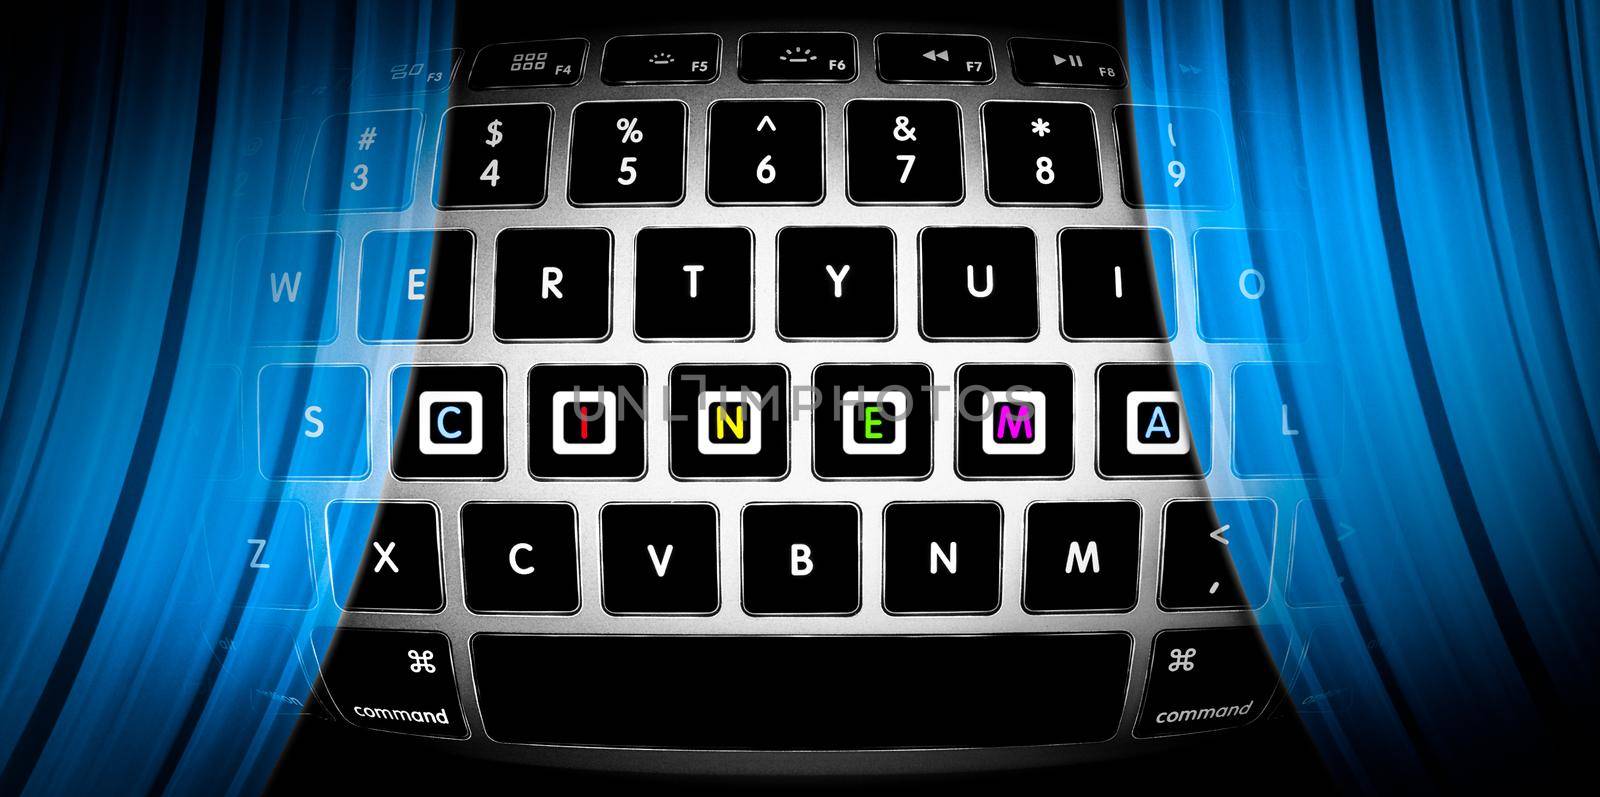 Silver keyboard with word Cinema on it. Blue curtains of online theatre. Watch movies on Internet. Concept of entertainment for people on web. Cyber theater in computer. Design for Internet site.